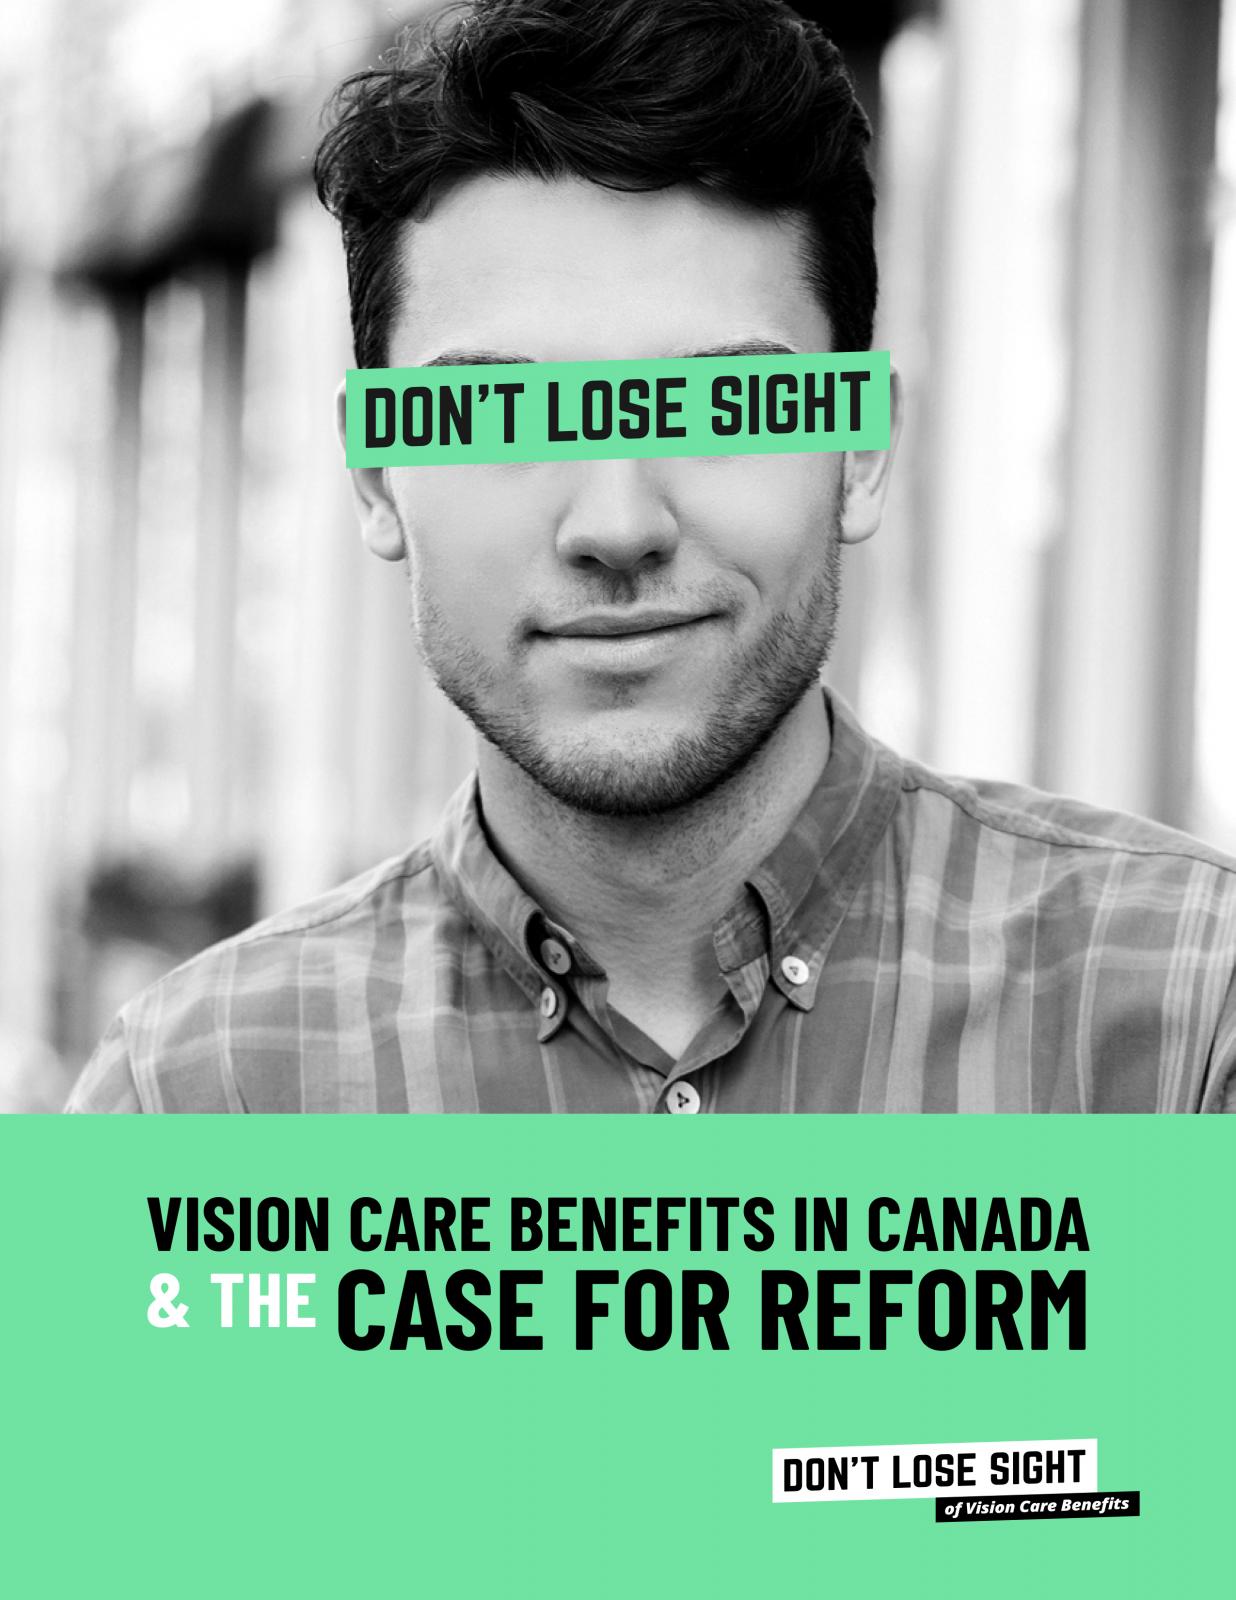 Vision Care Benefits in Canada: The Case for Reform